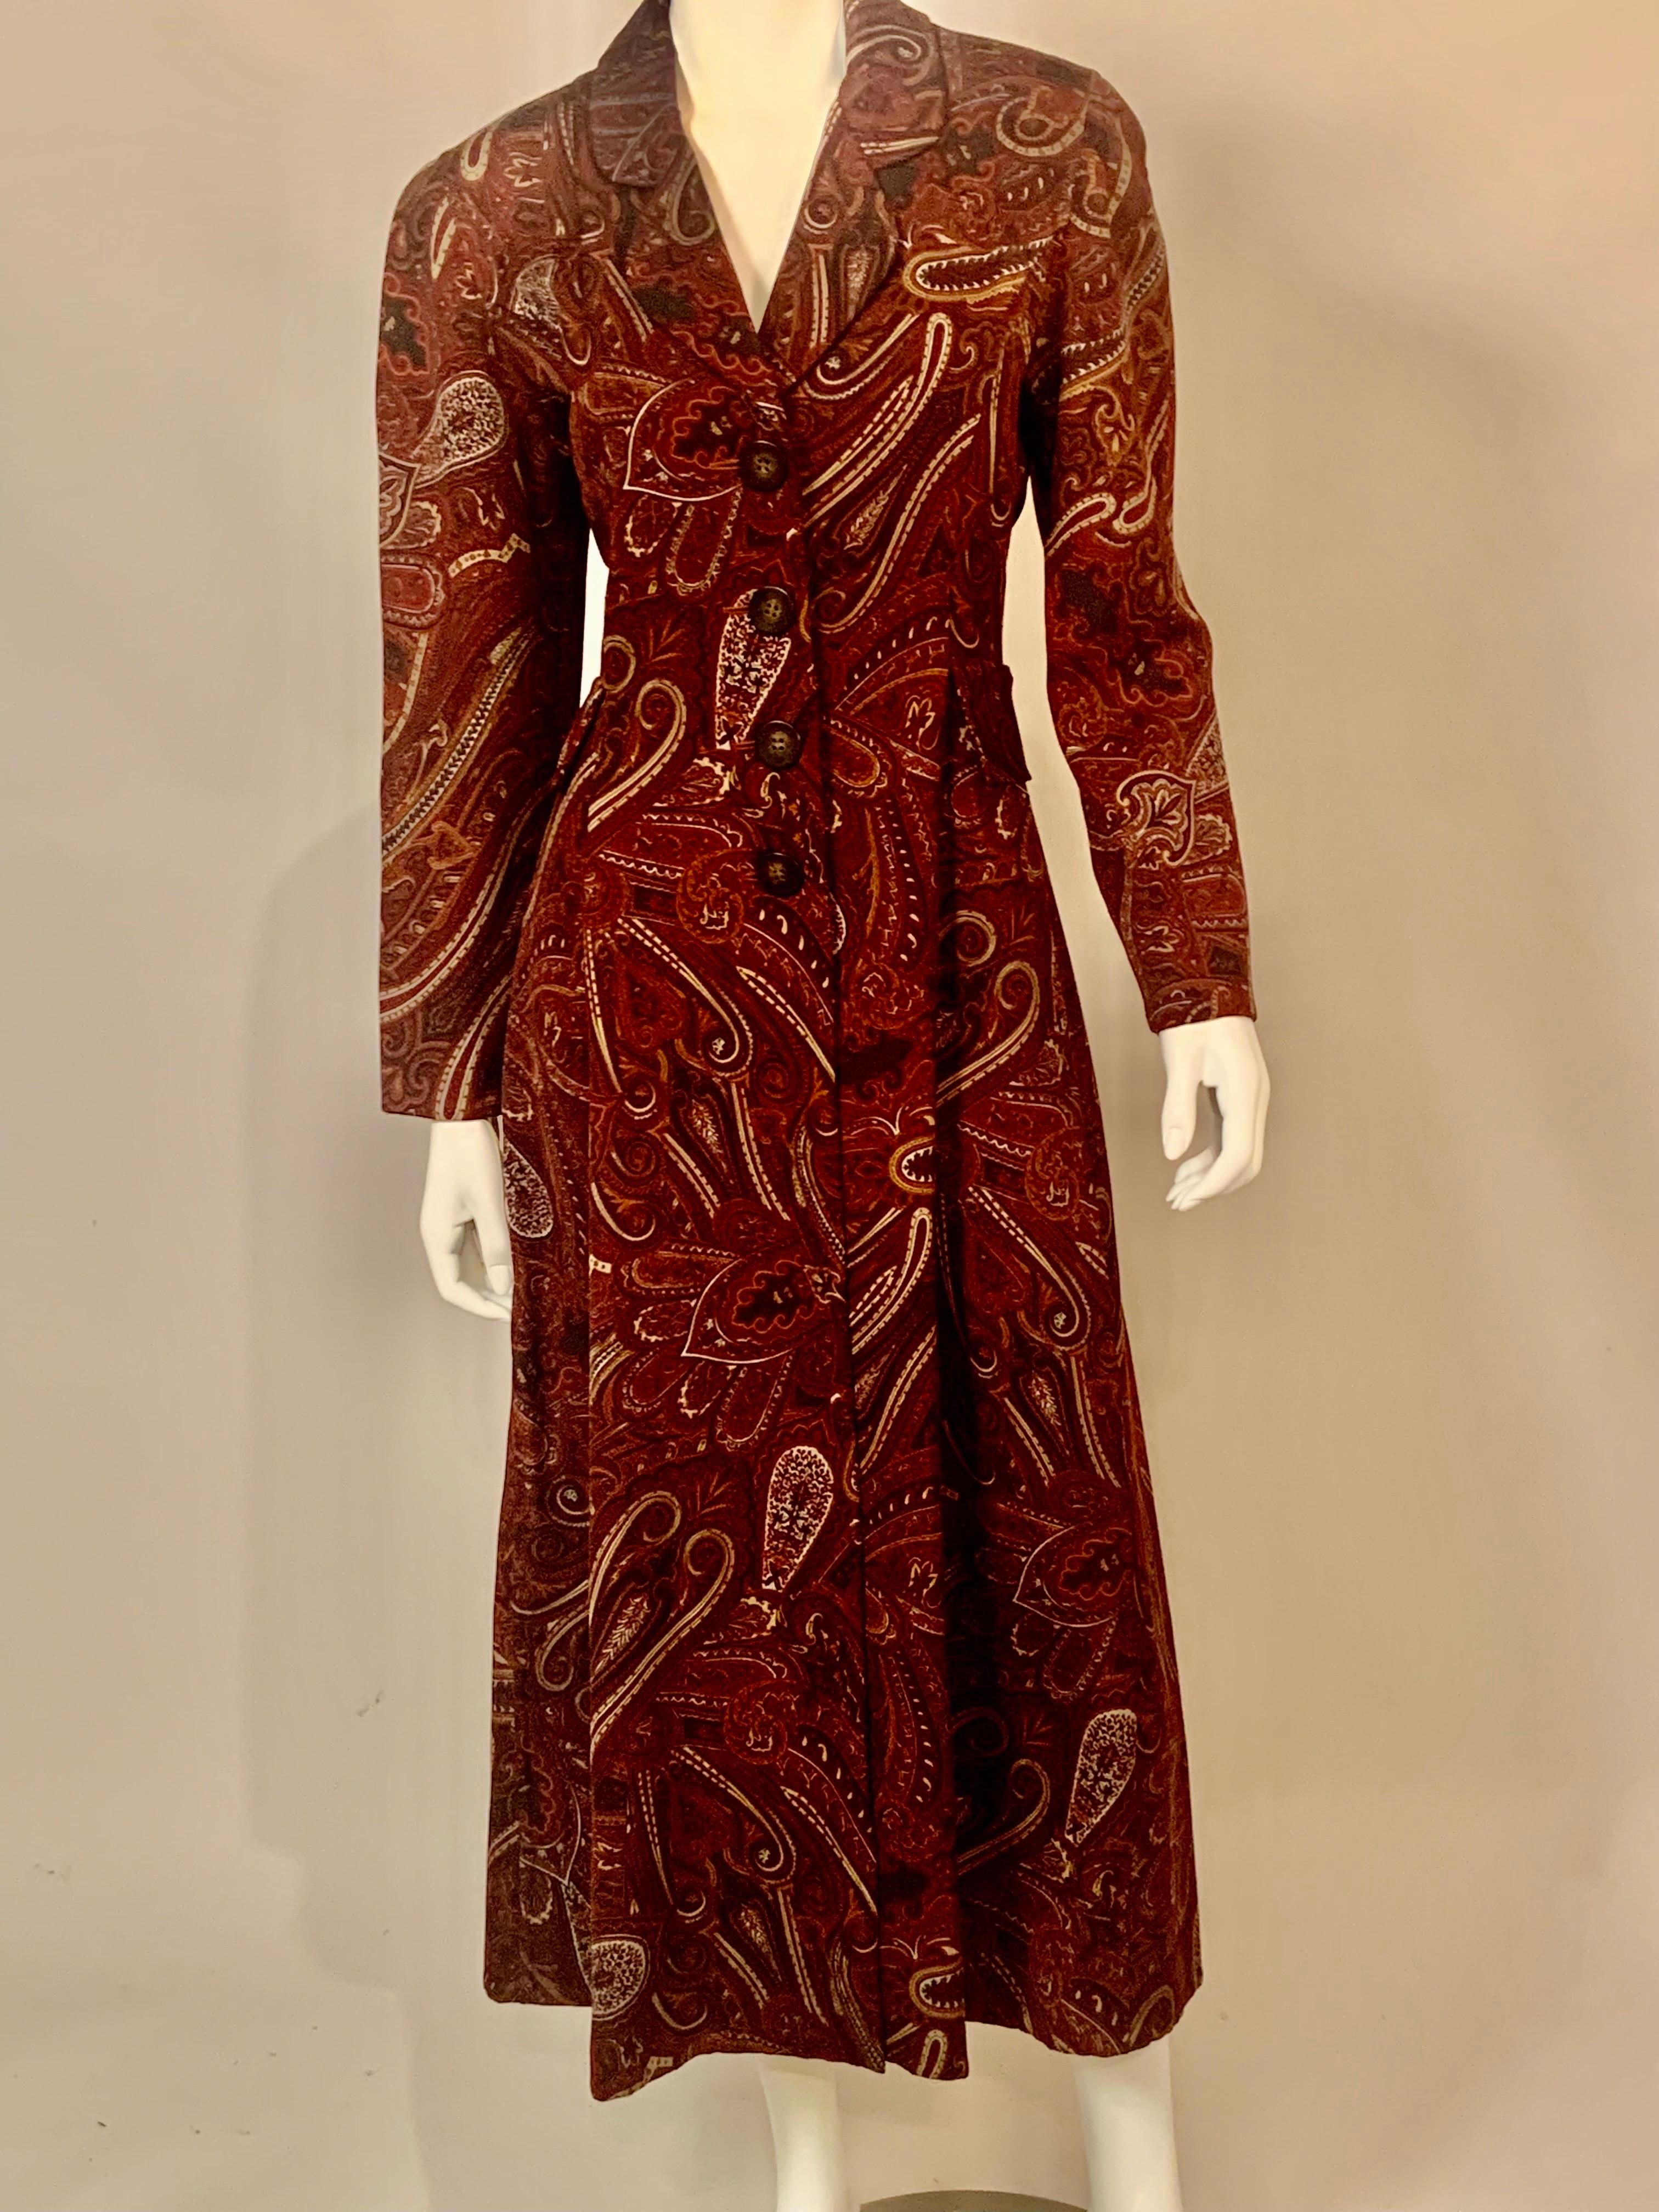 A stunning long red wool paisley coat from Bill Blass has a notched collar and four button closure.  There is a matching neck scarf and the coat is lined in sage green lightweight wool.  It is in excellent condition.
Measurements;   Shoulders 17